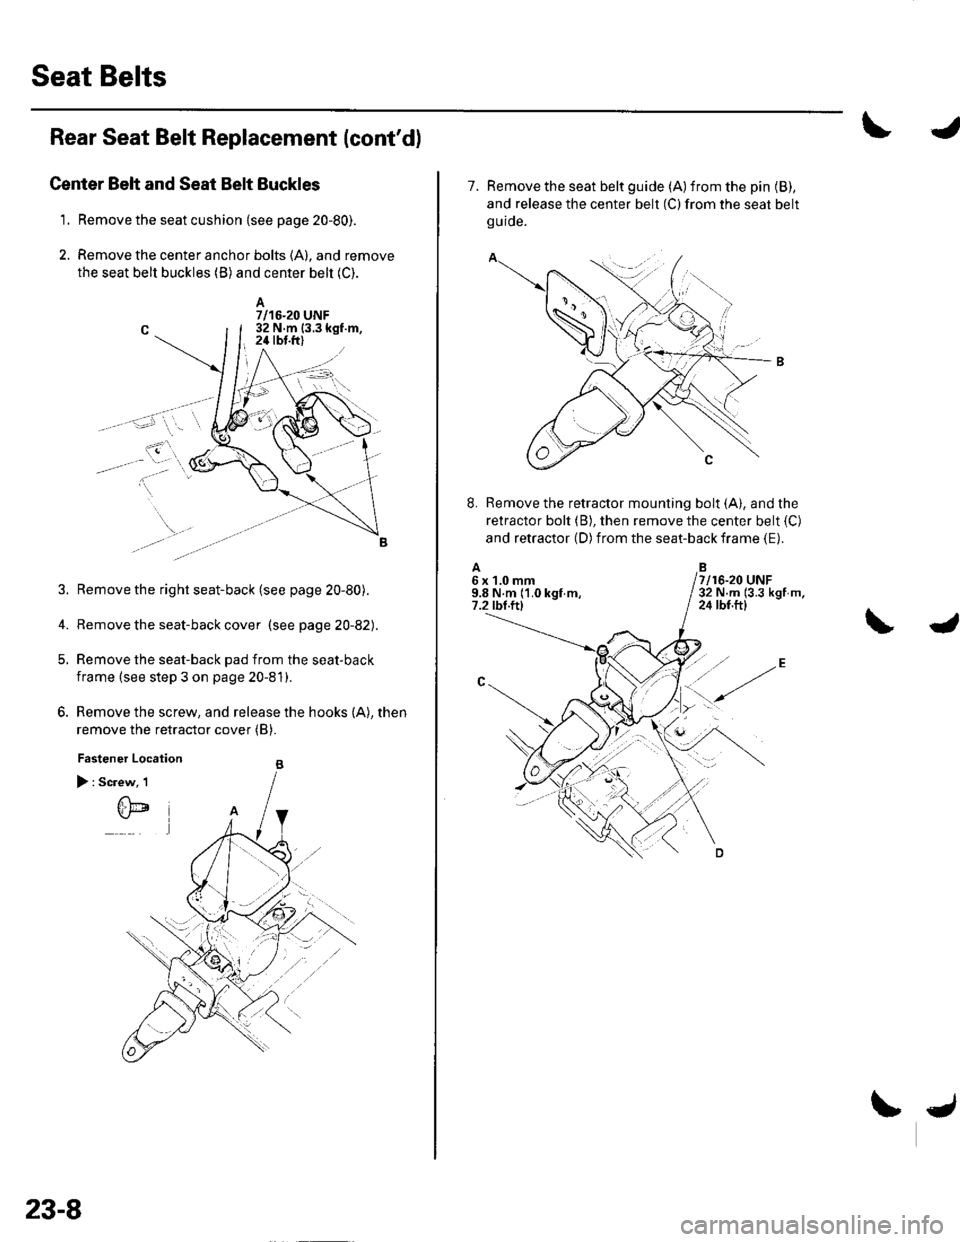 HONDA CIVIC 2003 7.G Workshop Manual Seat Belts
Rear Seat Belt Replacement {contd)
Center Belt and Seat Belt Buckles
1. Remove the seat cushion {see page 20-80).
2. Remove the center anchor bolts (A), and remove
the seat belt buckles (B